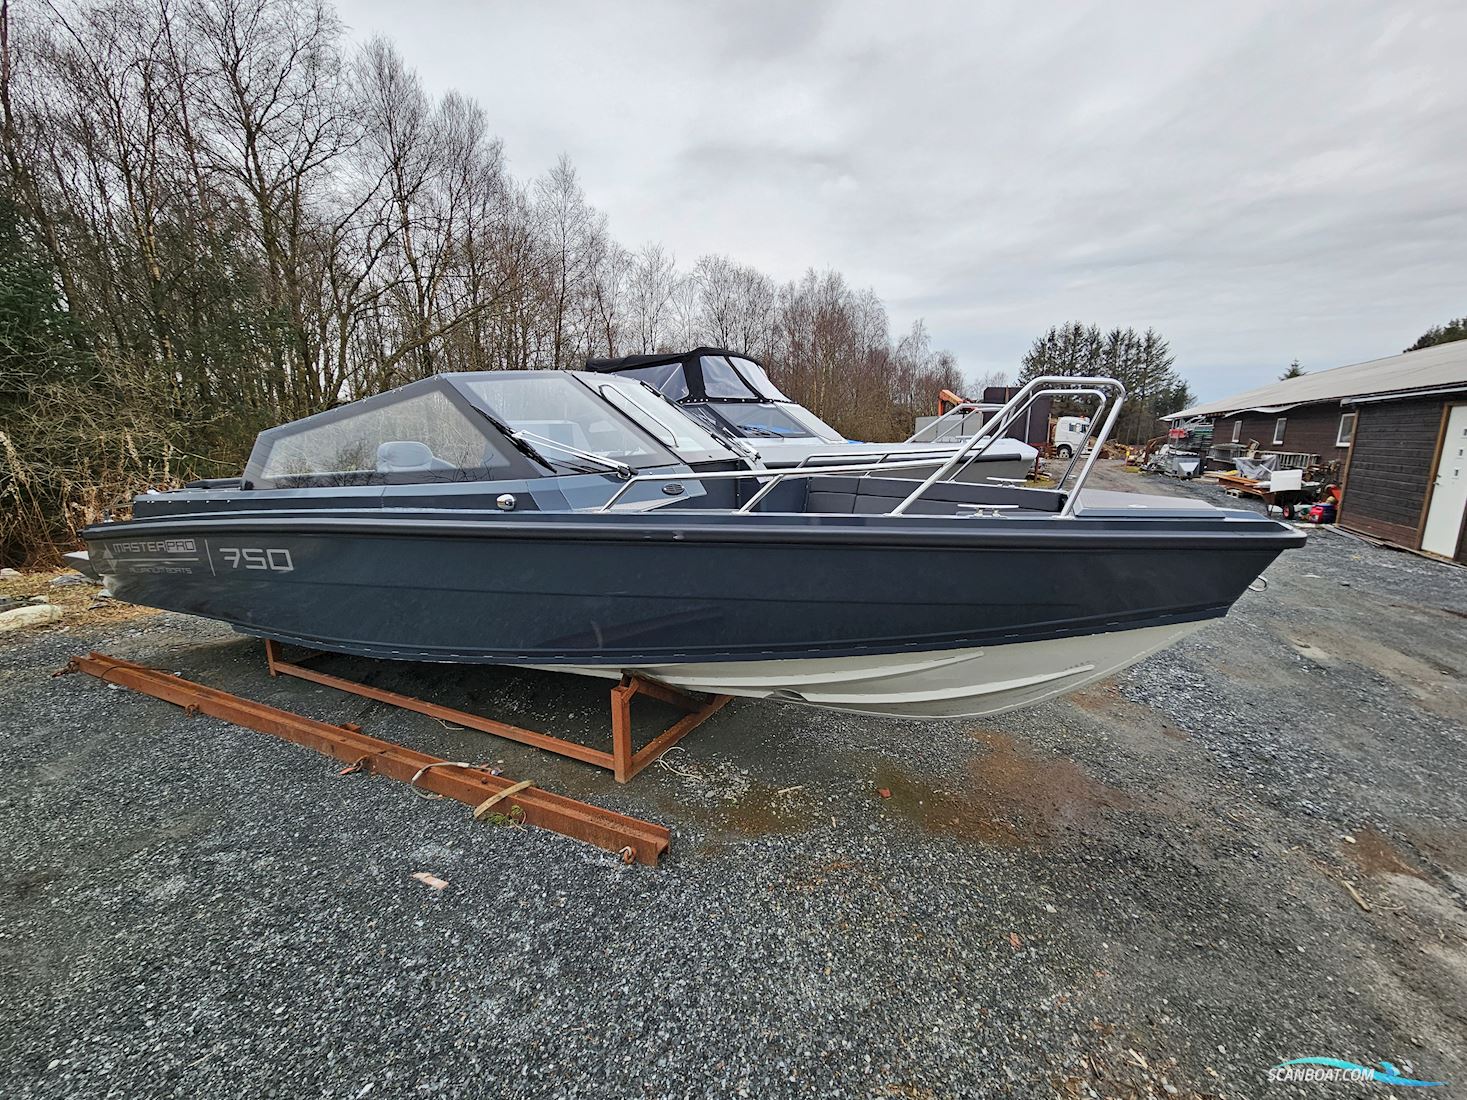 Master Pro 750 wb Power boat 2022, Norway